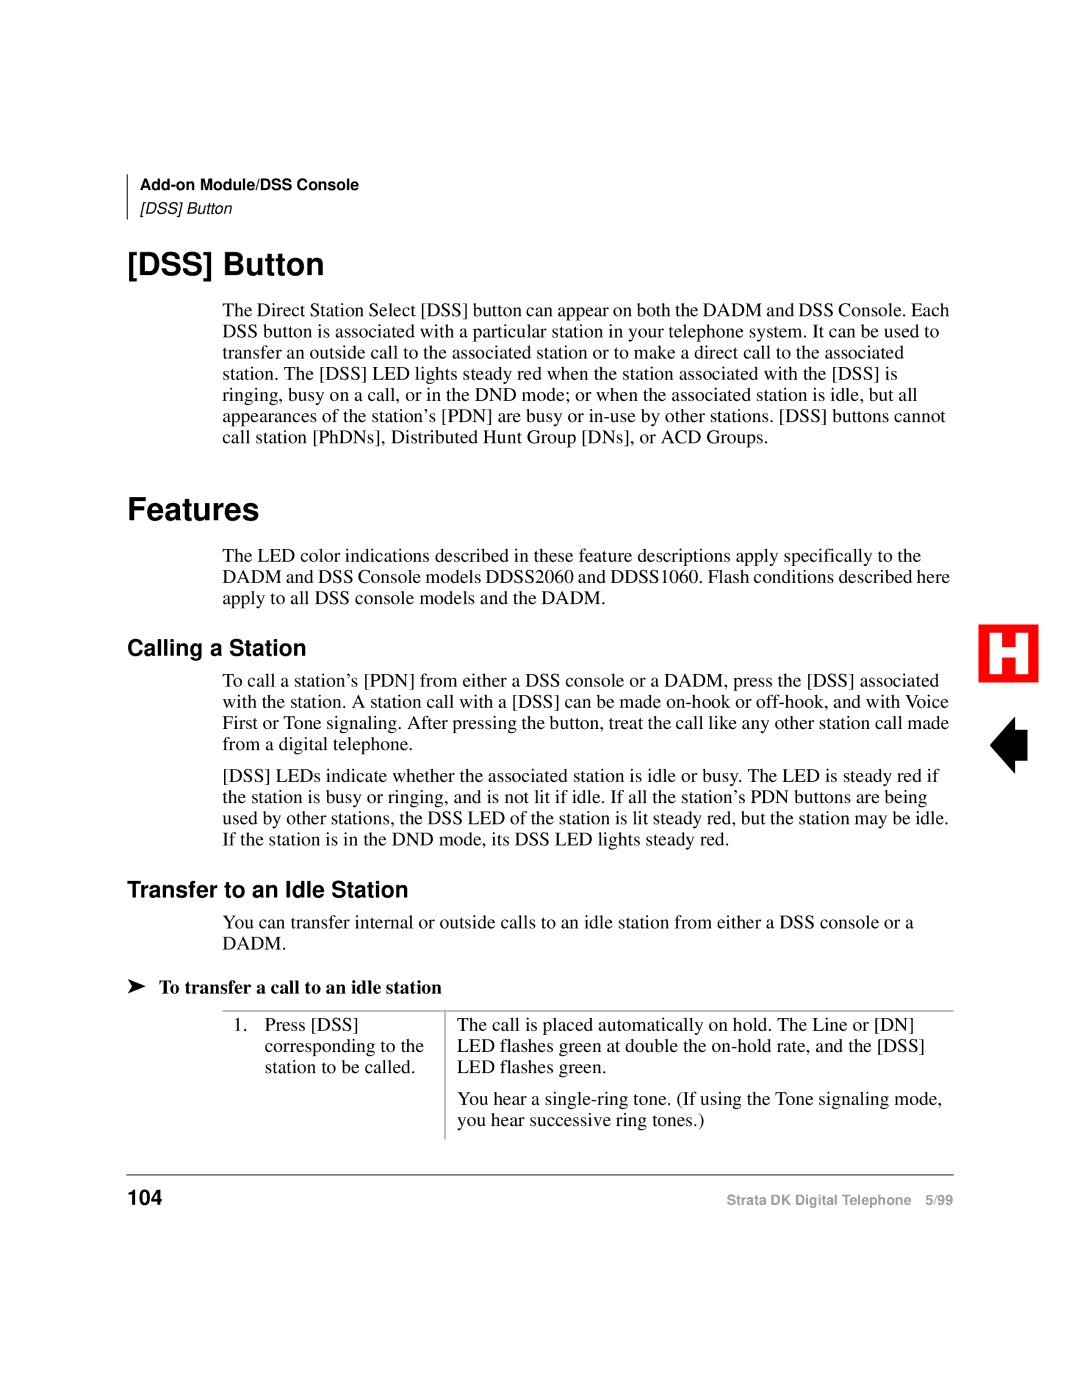 Toshiba Digital Telephone manual DSS Button, Features, Calling a Station, Transfer to an Idle Station, 104 